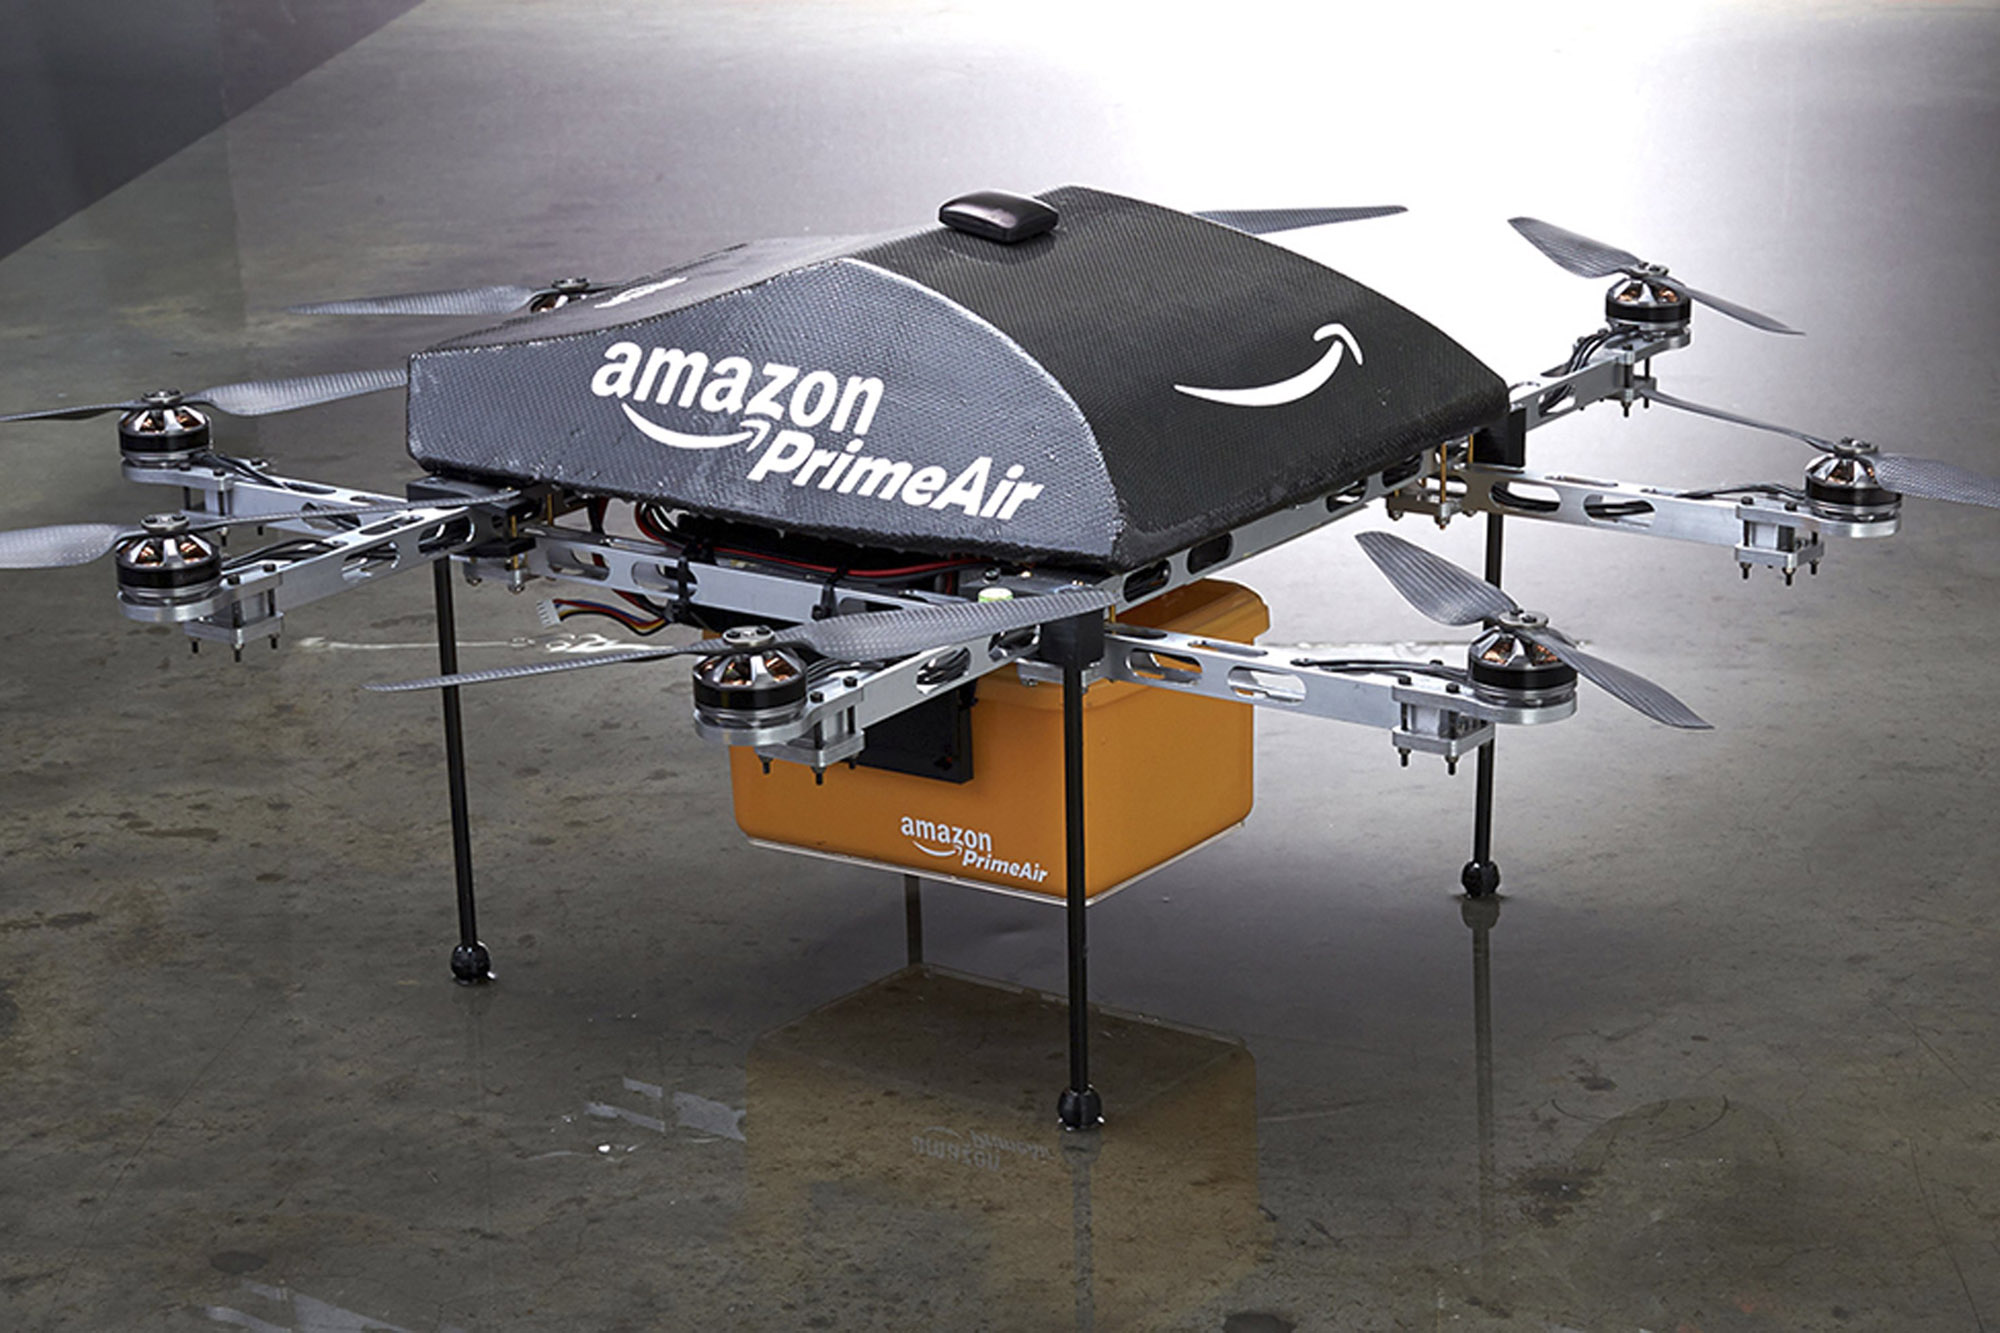 Amazon to Trial Drone Deliveries in the UK